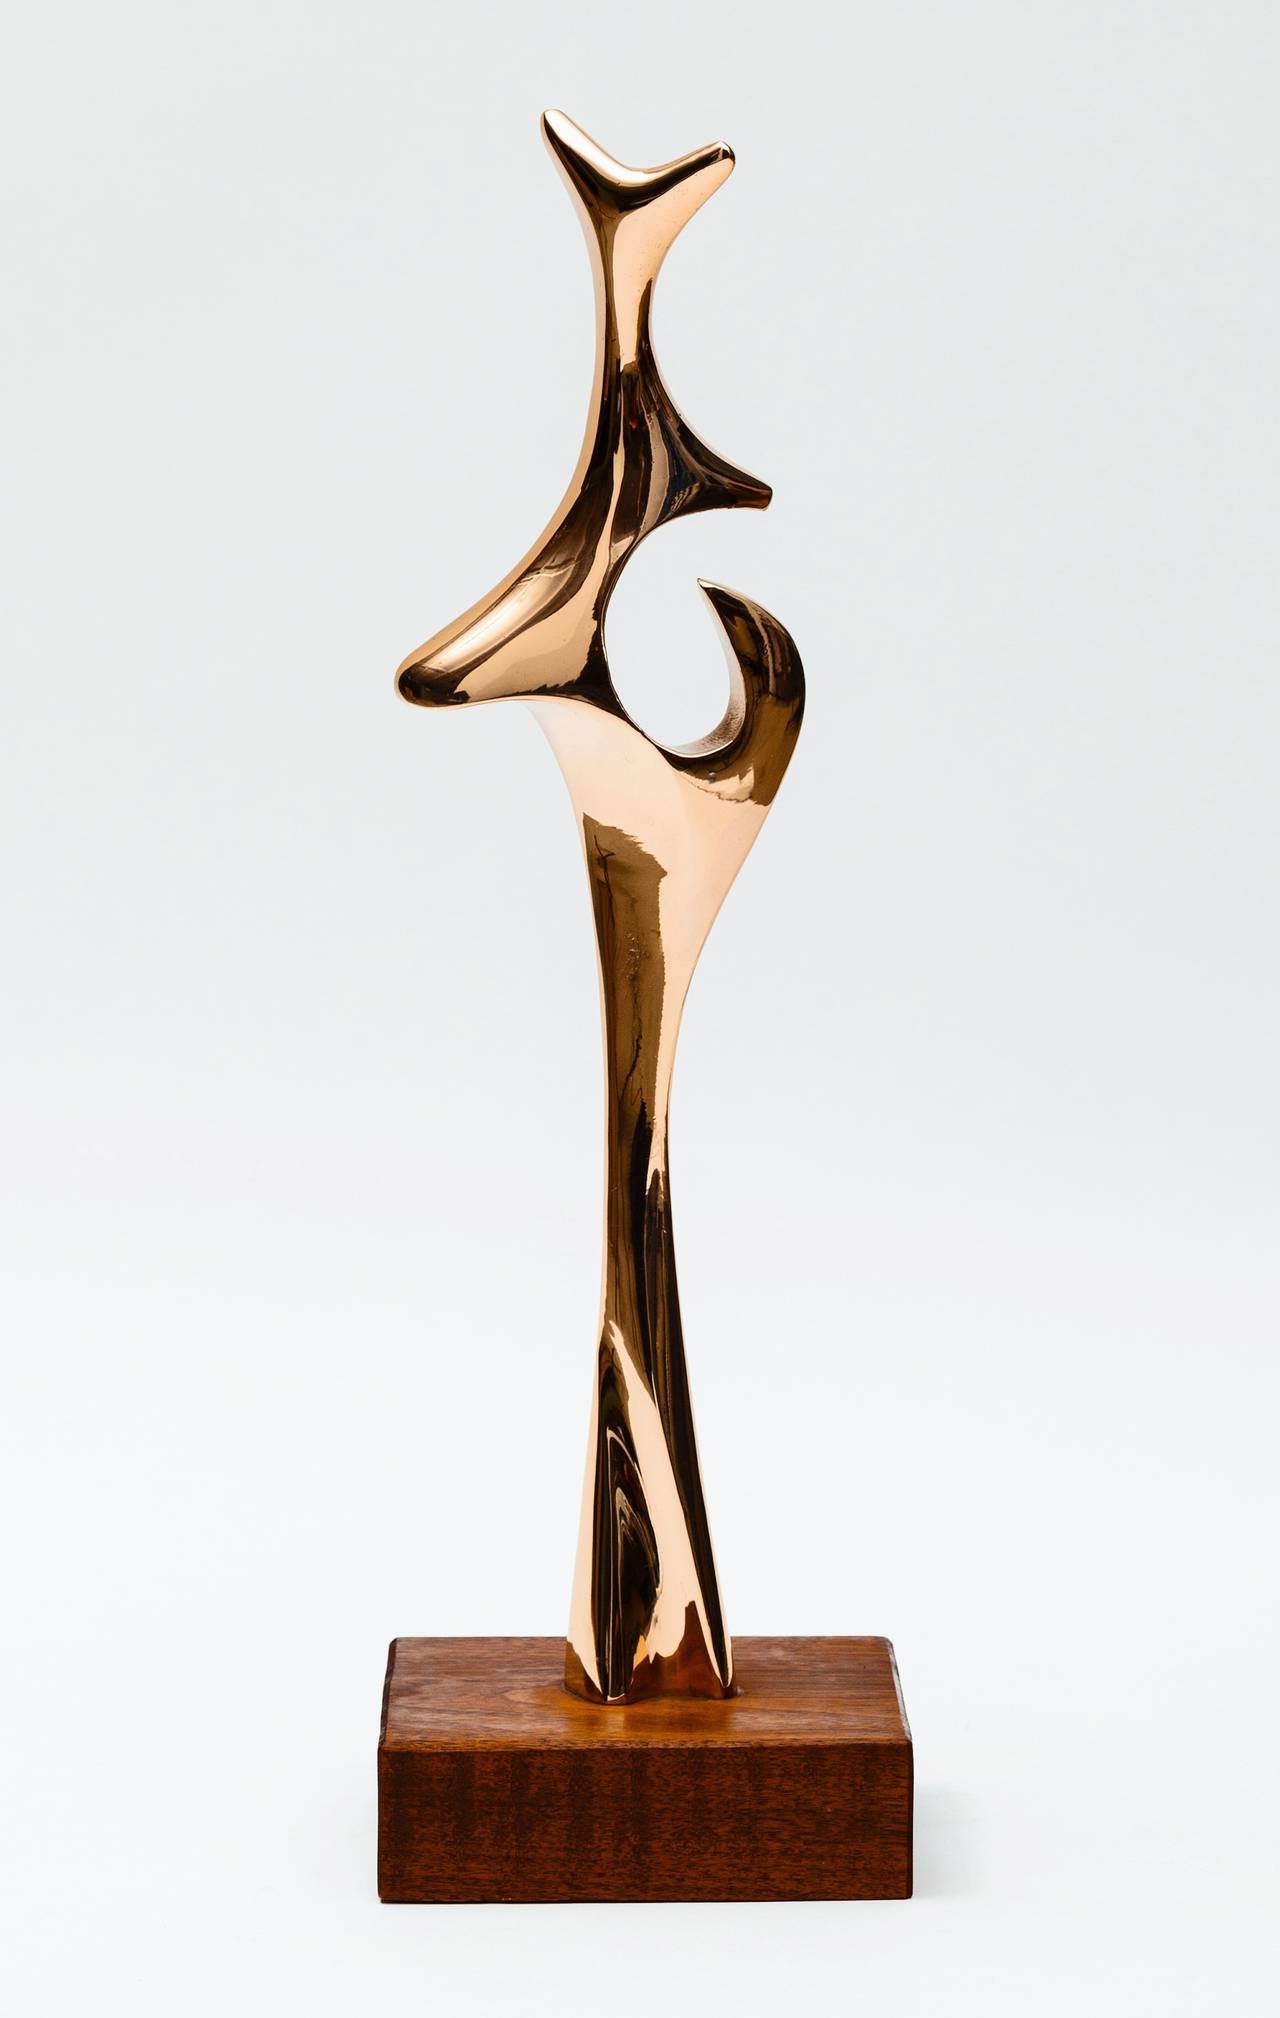 Fabulous biomorphic bronze sculpture in the manner of Antonio Grediaga Kieff mounted on a mahogany block. Unsigned.

Please call or use the contact dealer link below to reach us directly with any questions regarding this item.